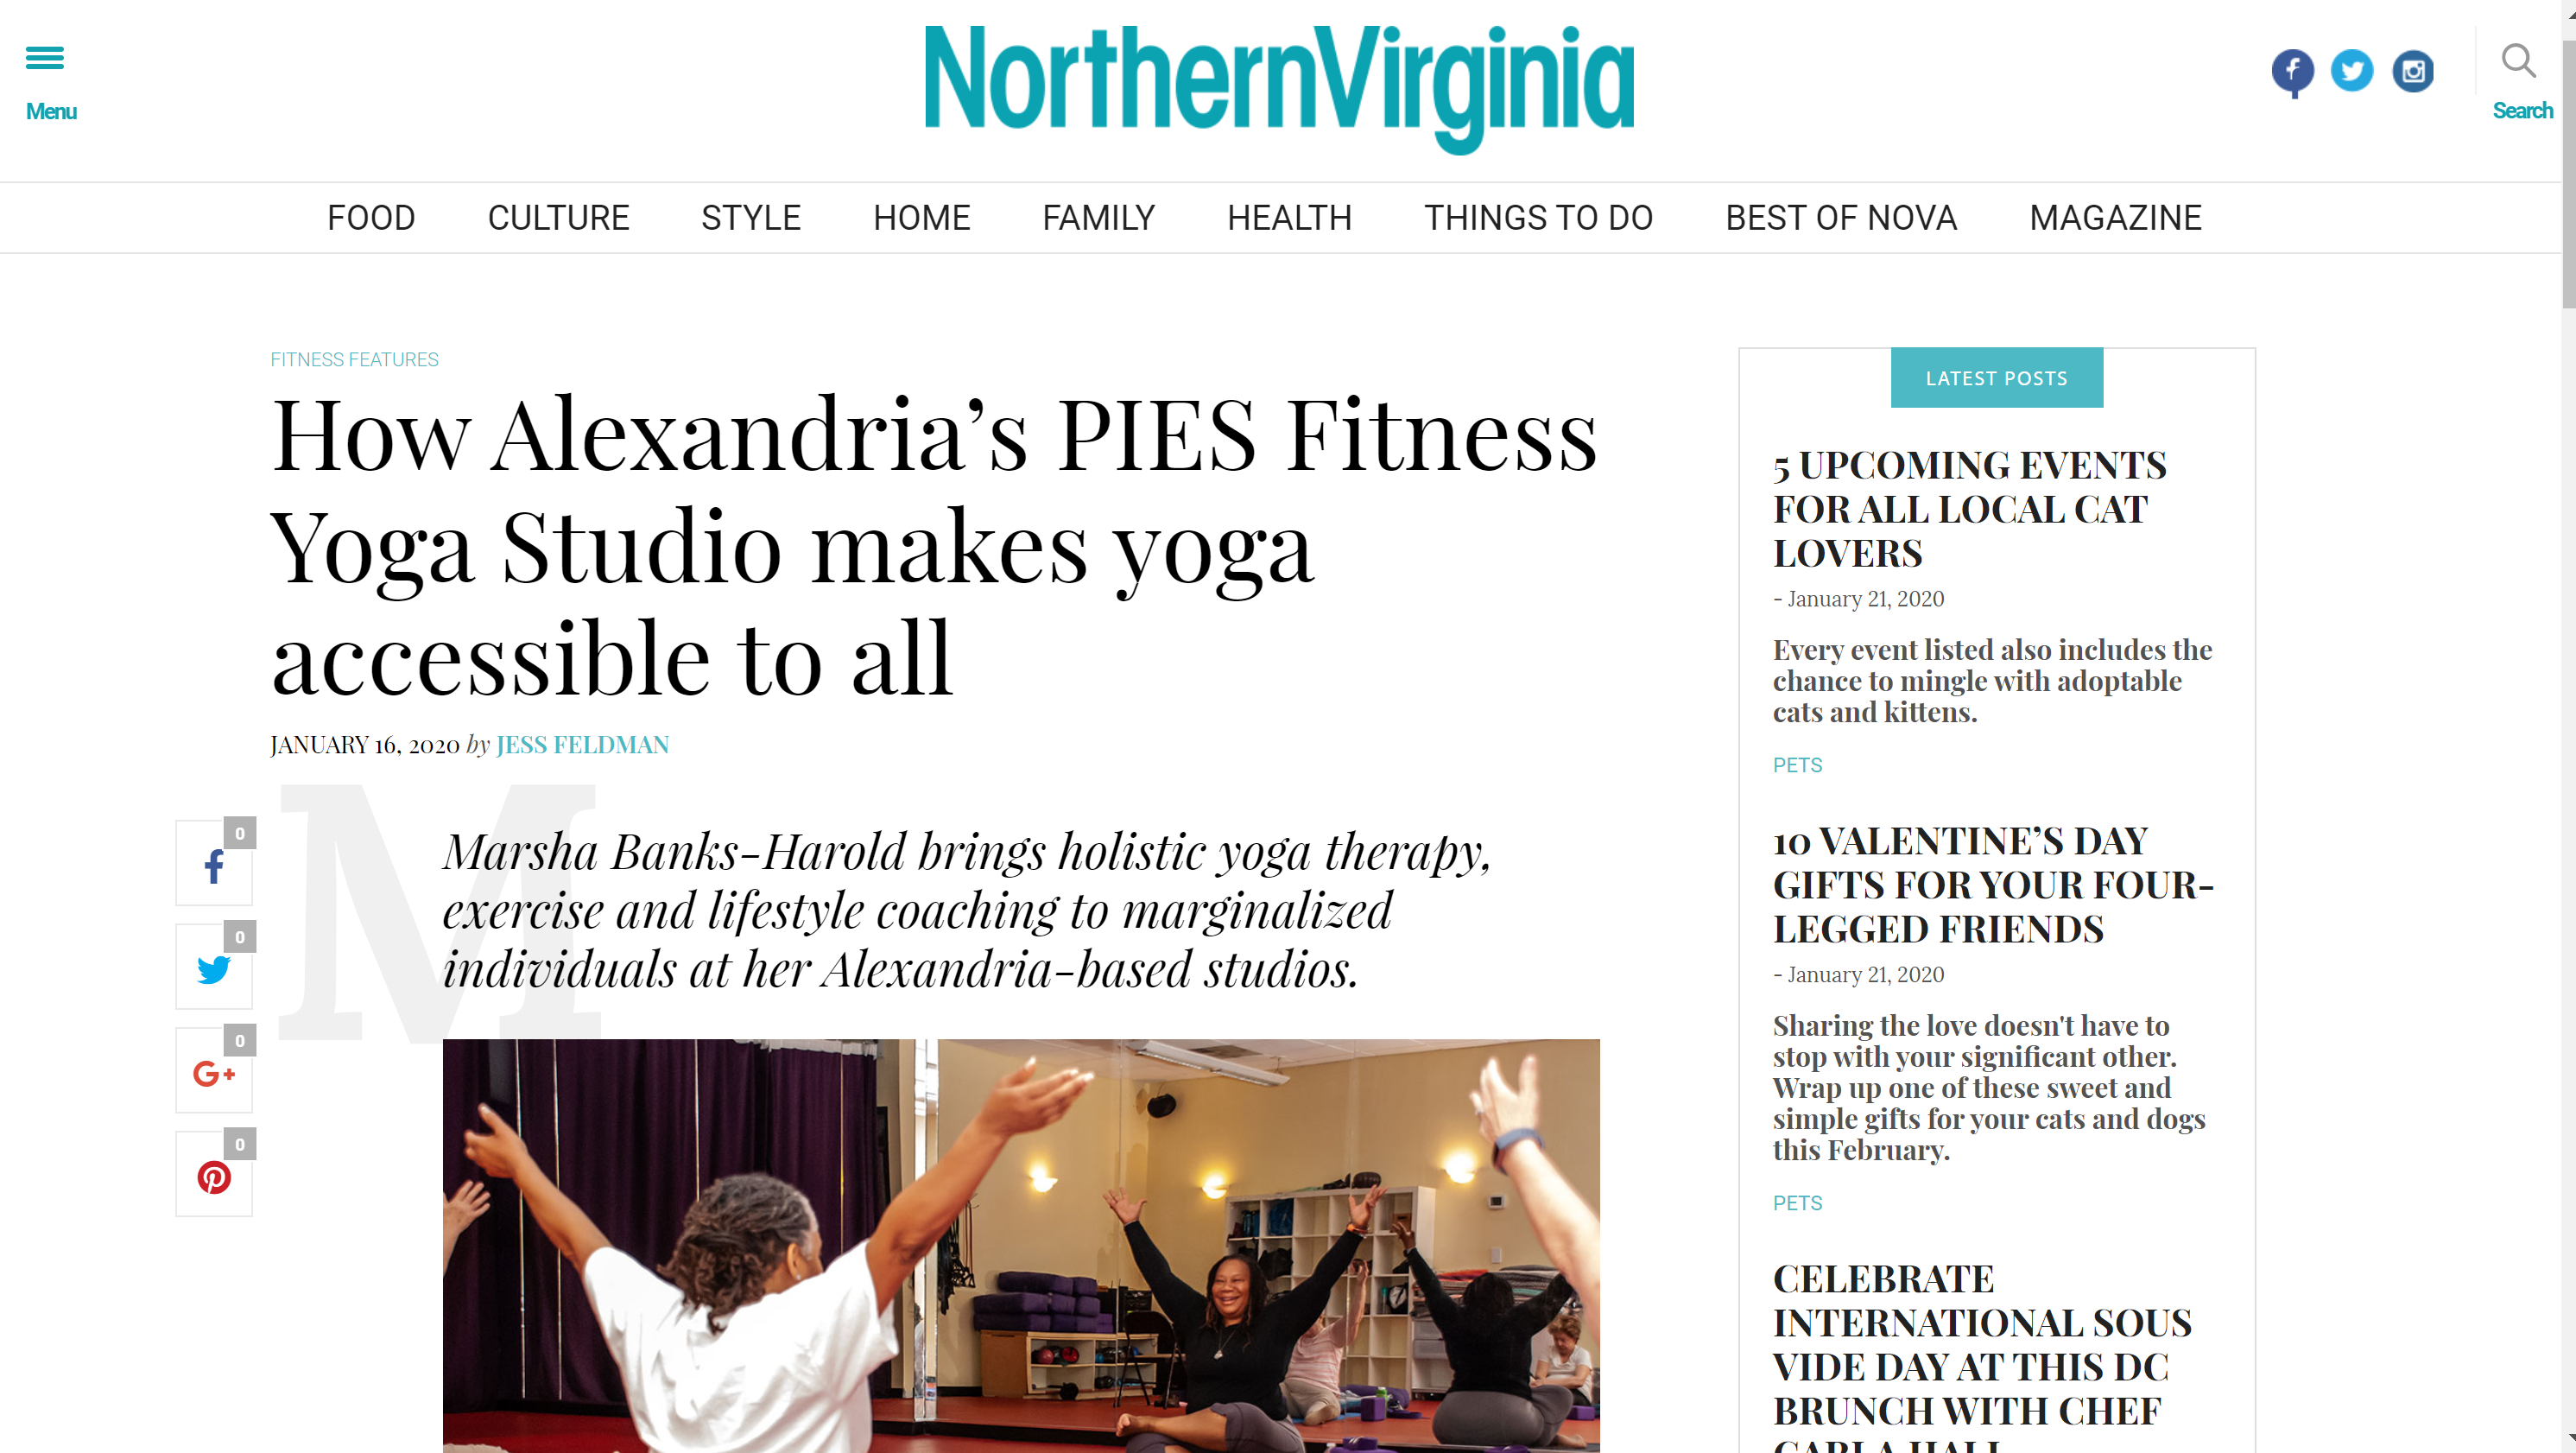 Alexandria s PIES Fitness Yoga Studio is accessible to all